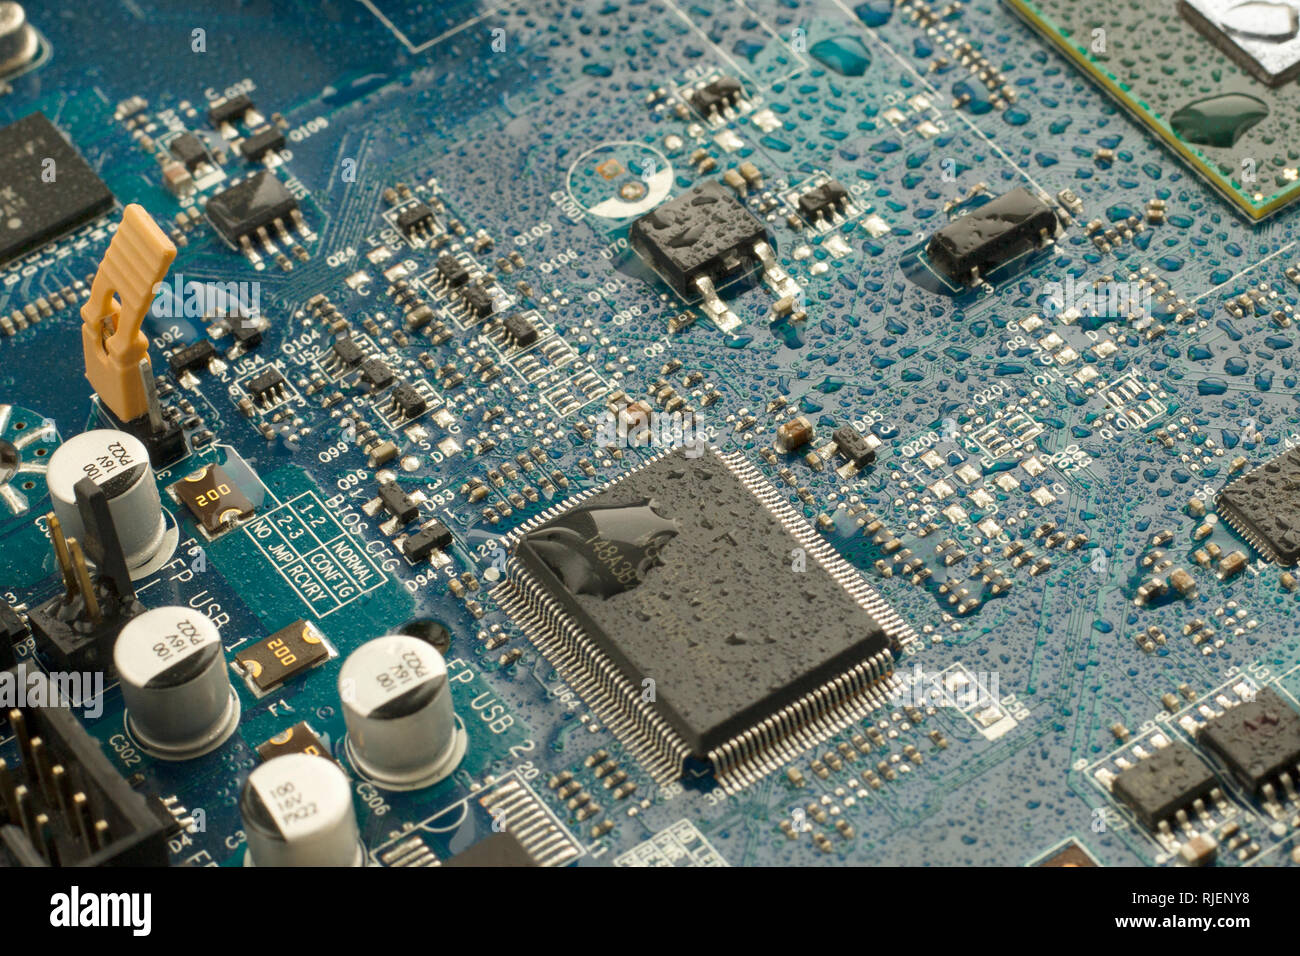 Computer part of the electrical circuit motherboard covered with water droplets. Close up image Stock Photo